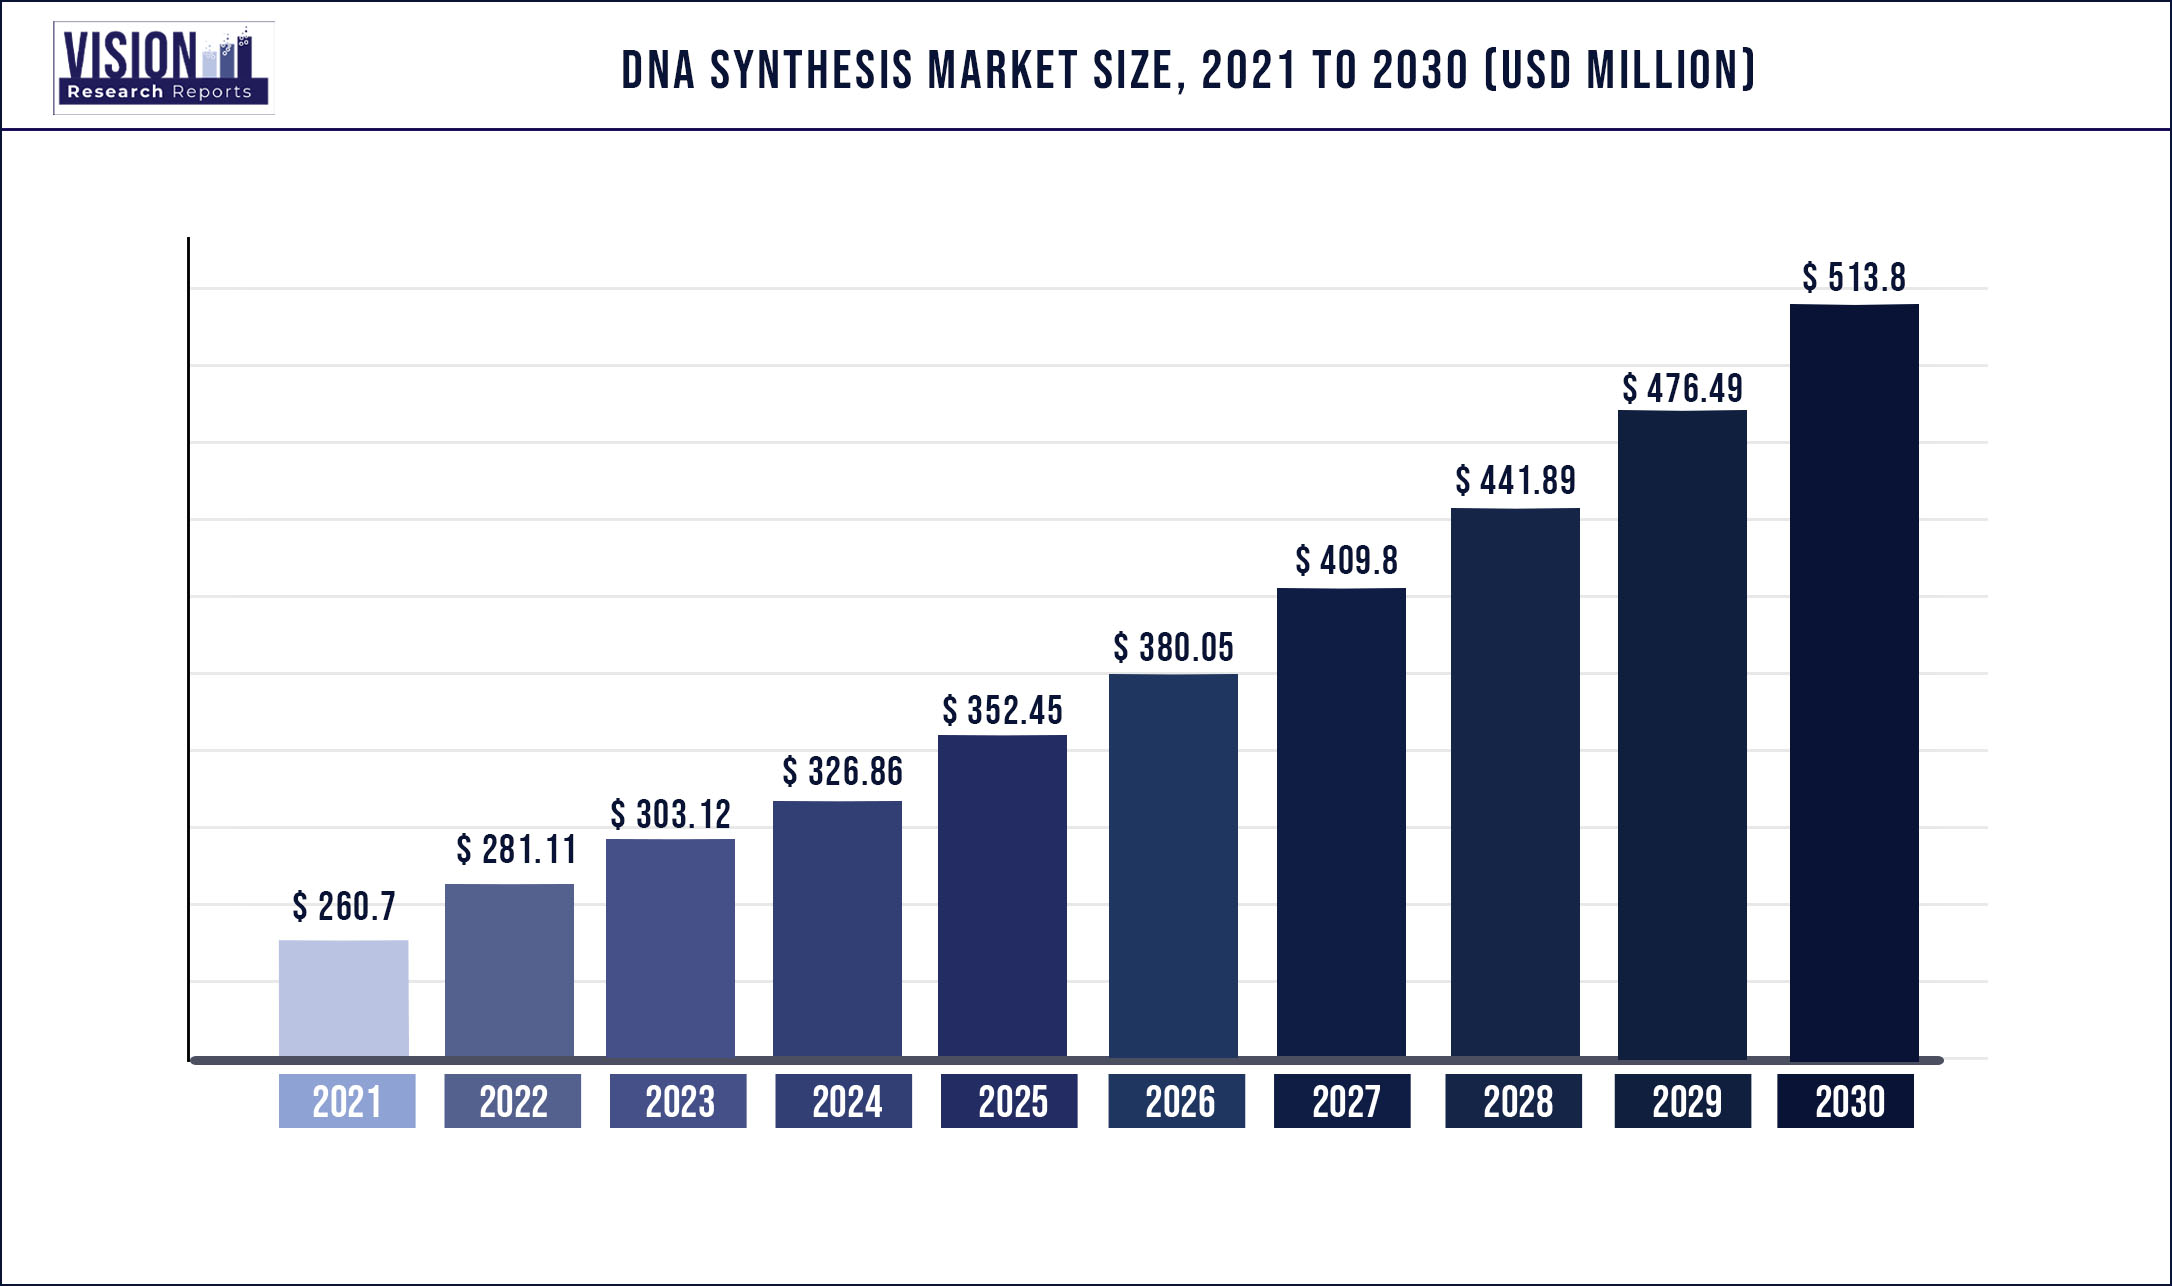 visionresearchreports.com/reportimg/DNA-Synthesis-Market-Size-2021-to-2030.jpg